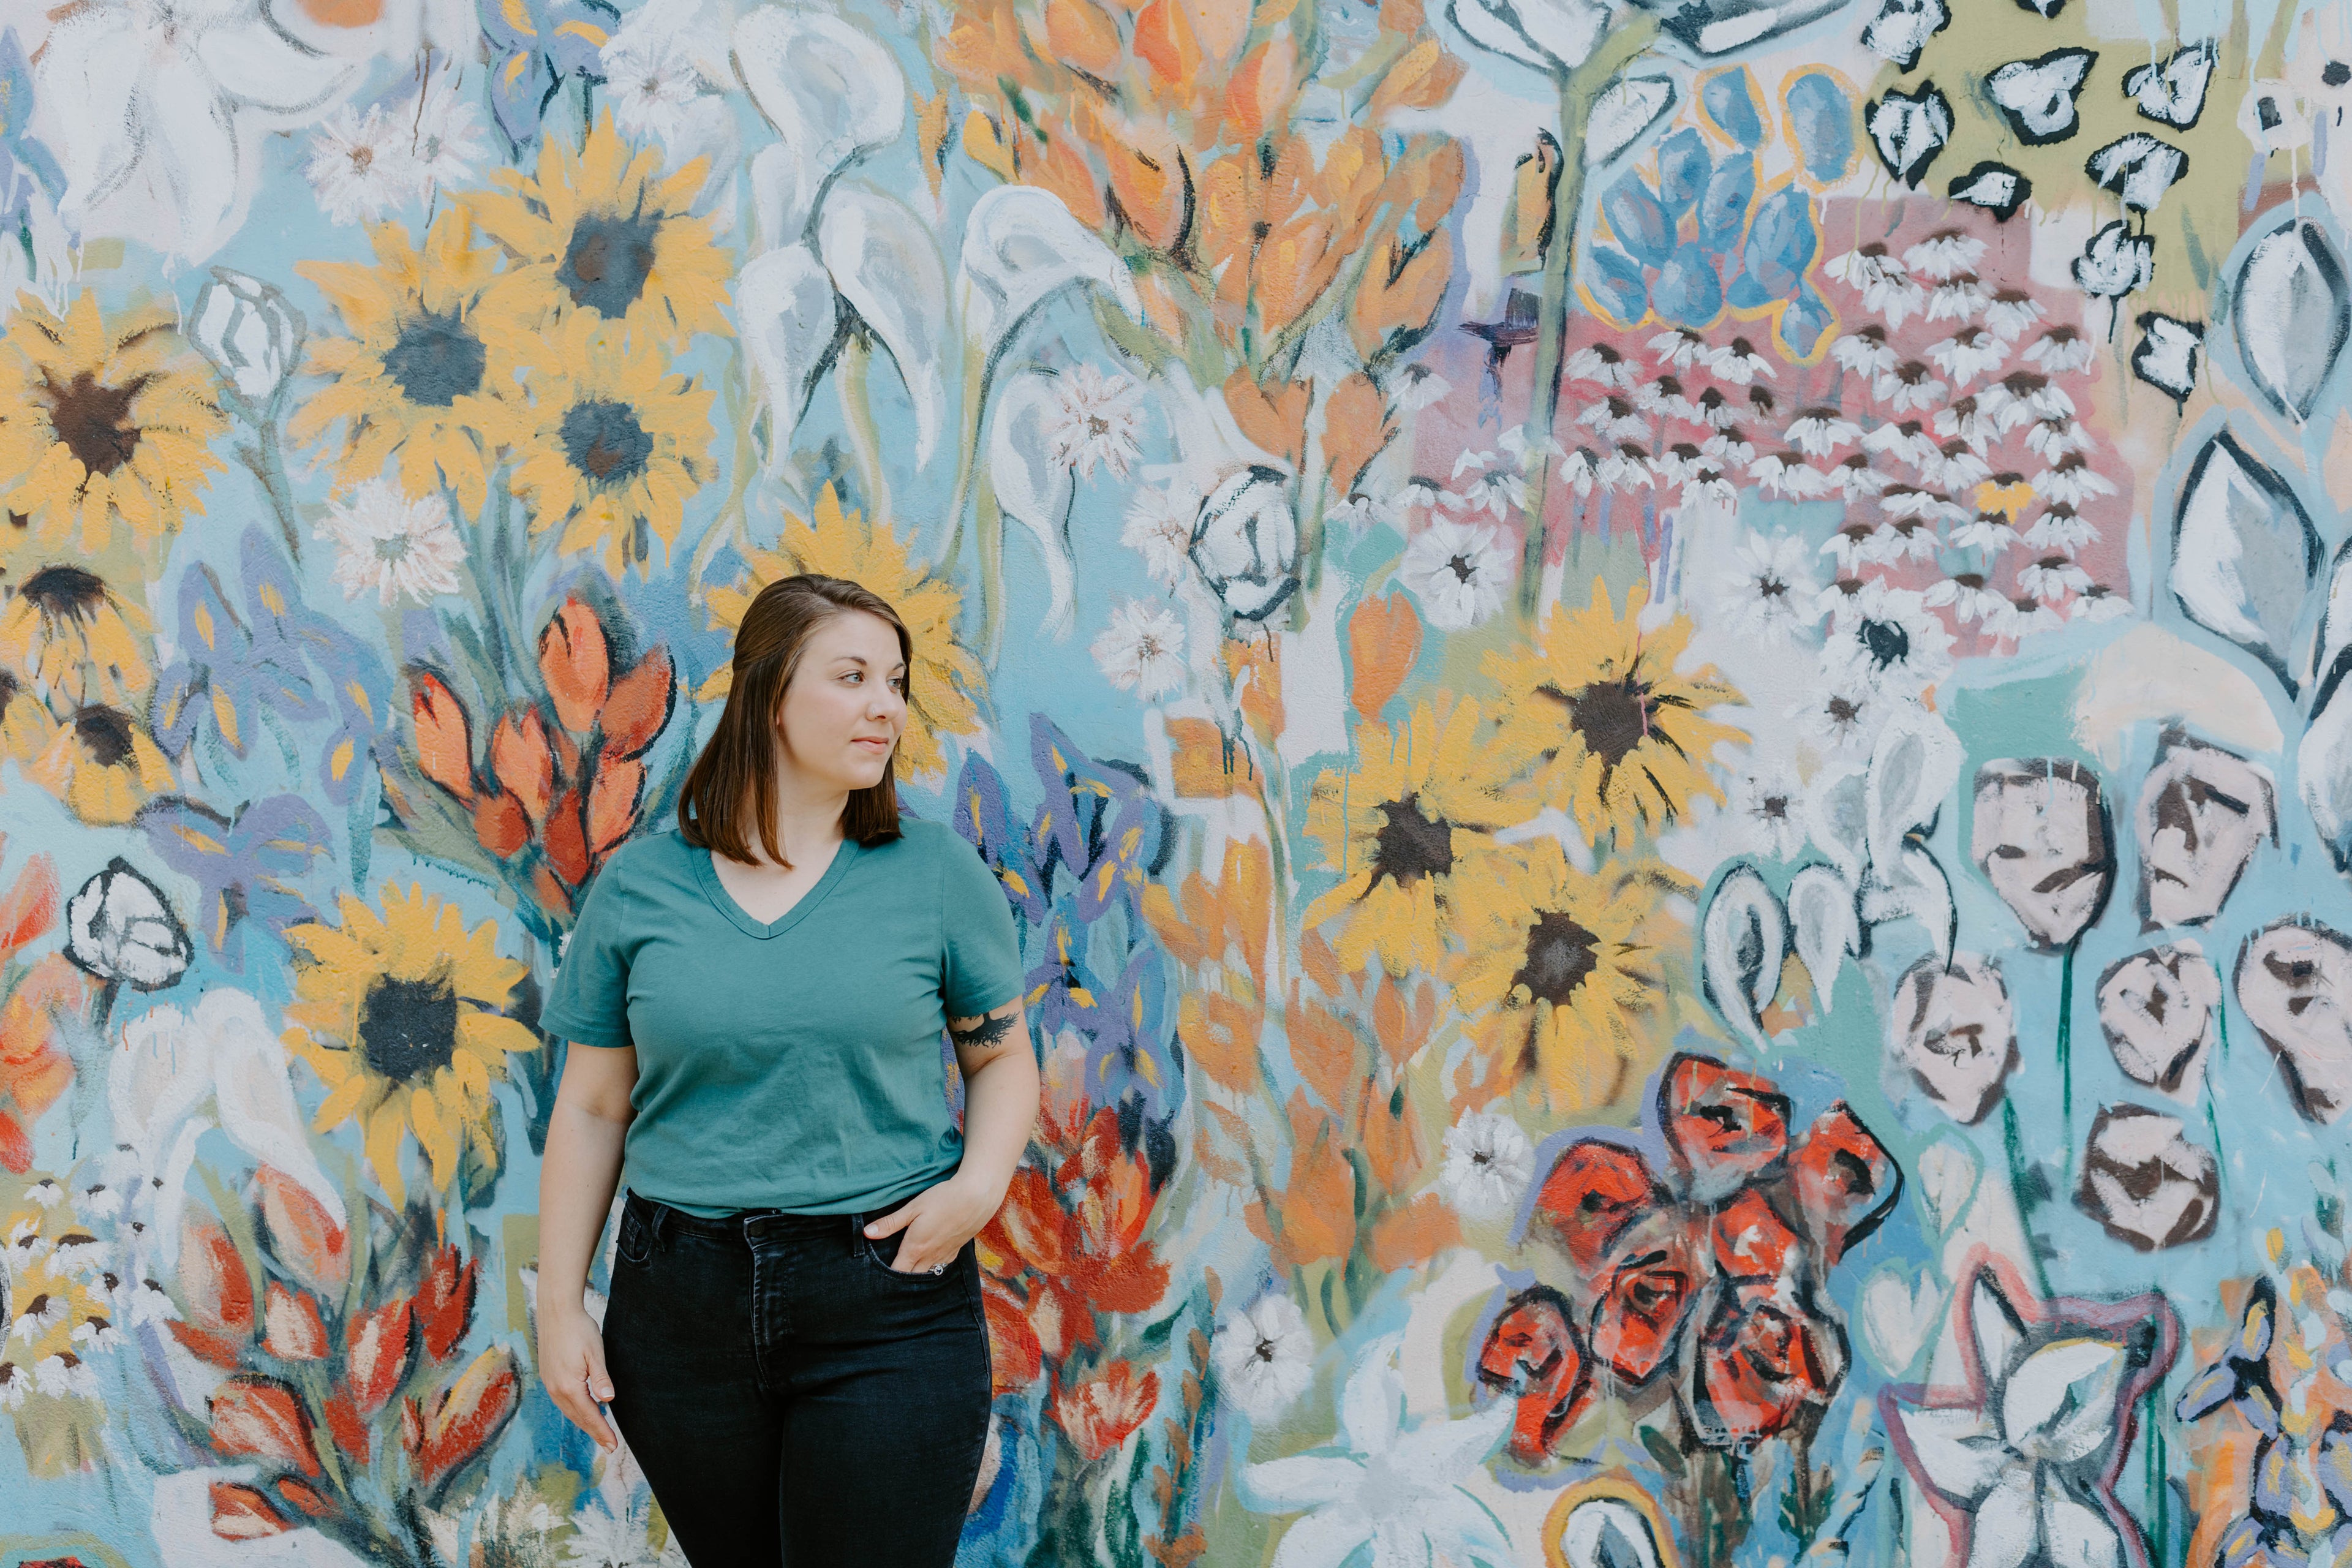 Amanda stands against a floral wall mural and looks to the right.